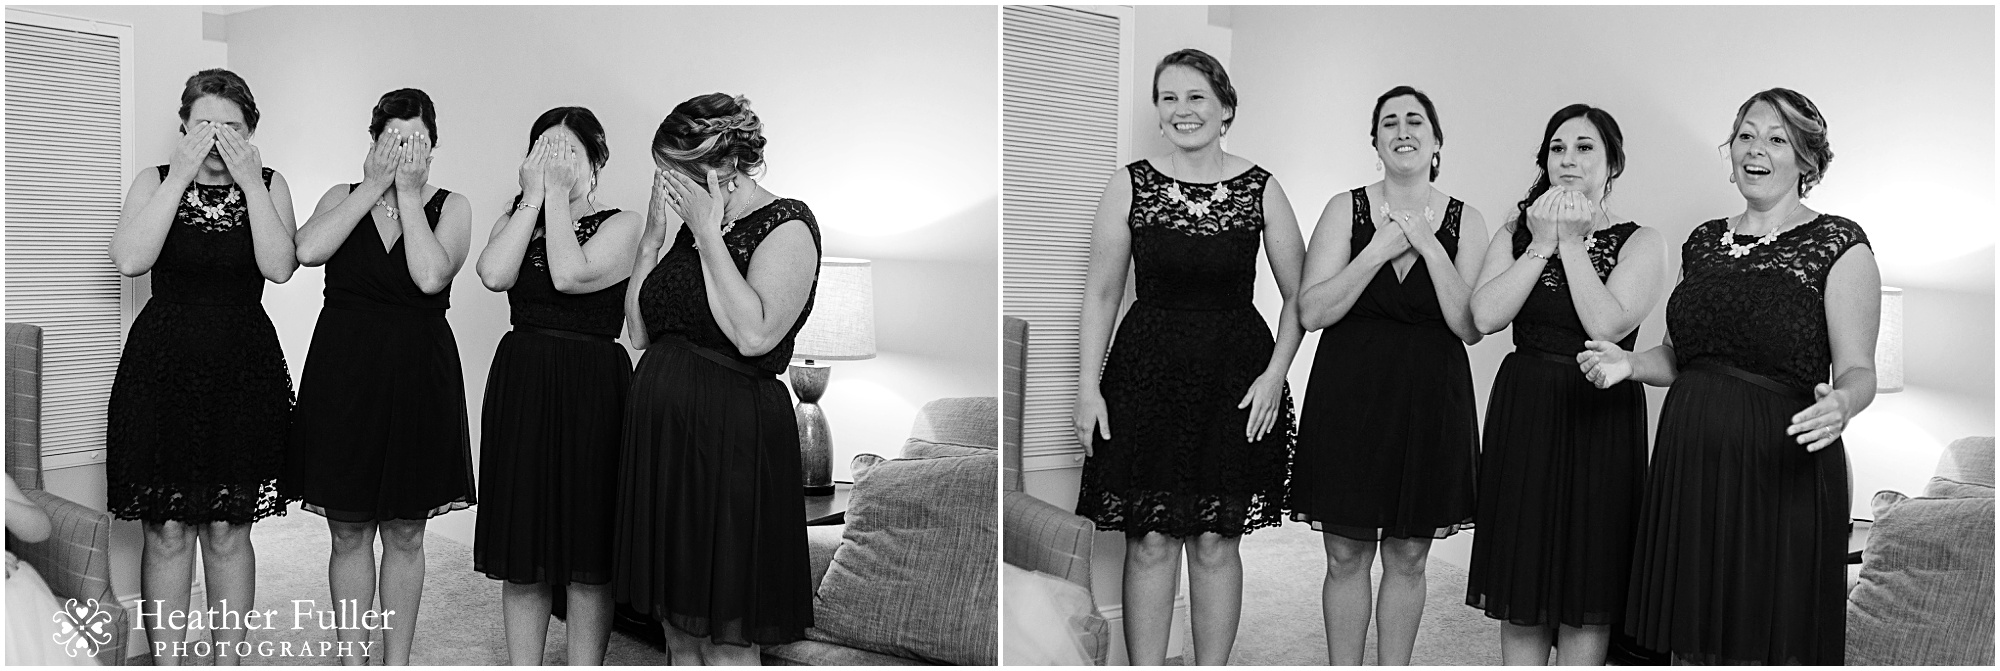 first_look_bridesmaids_black_and_white_wedding_photos